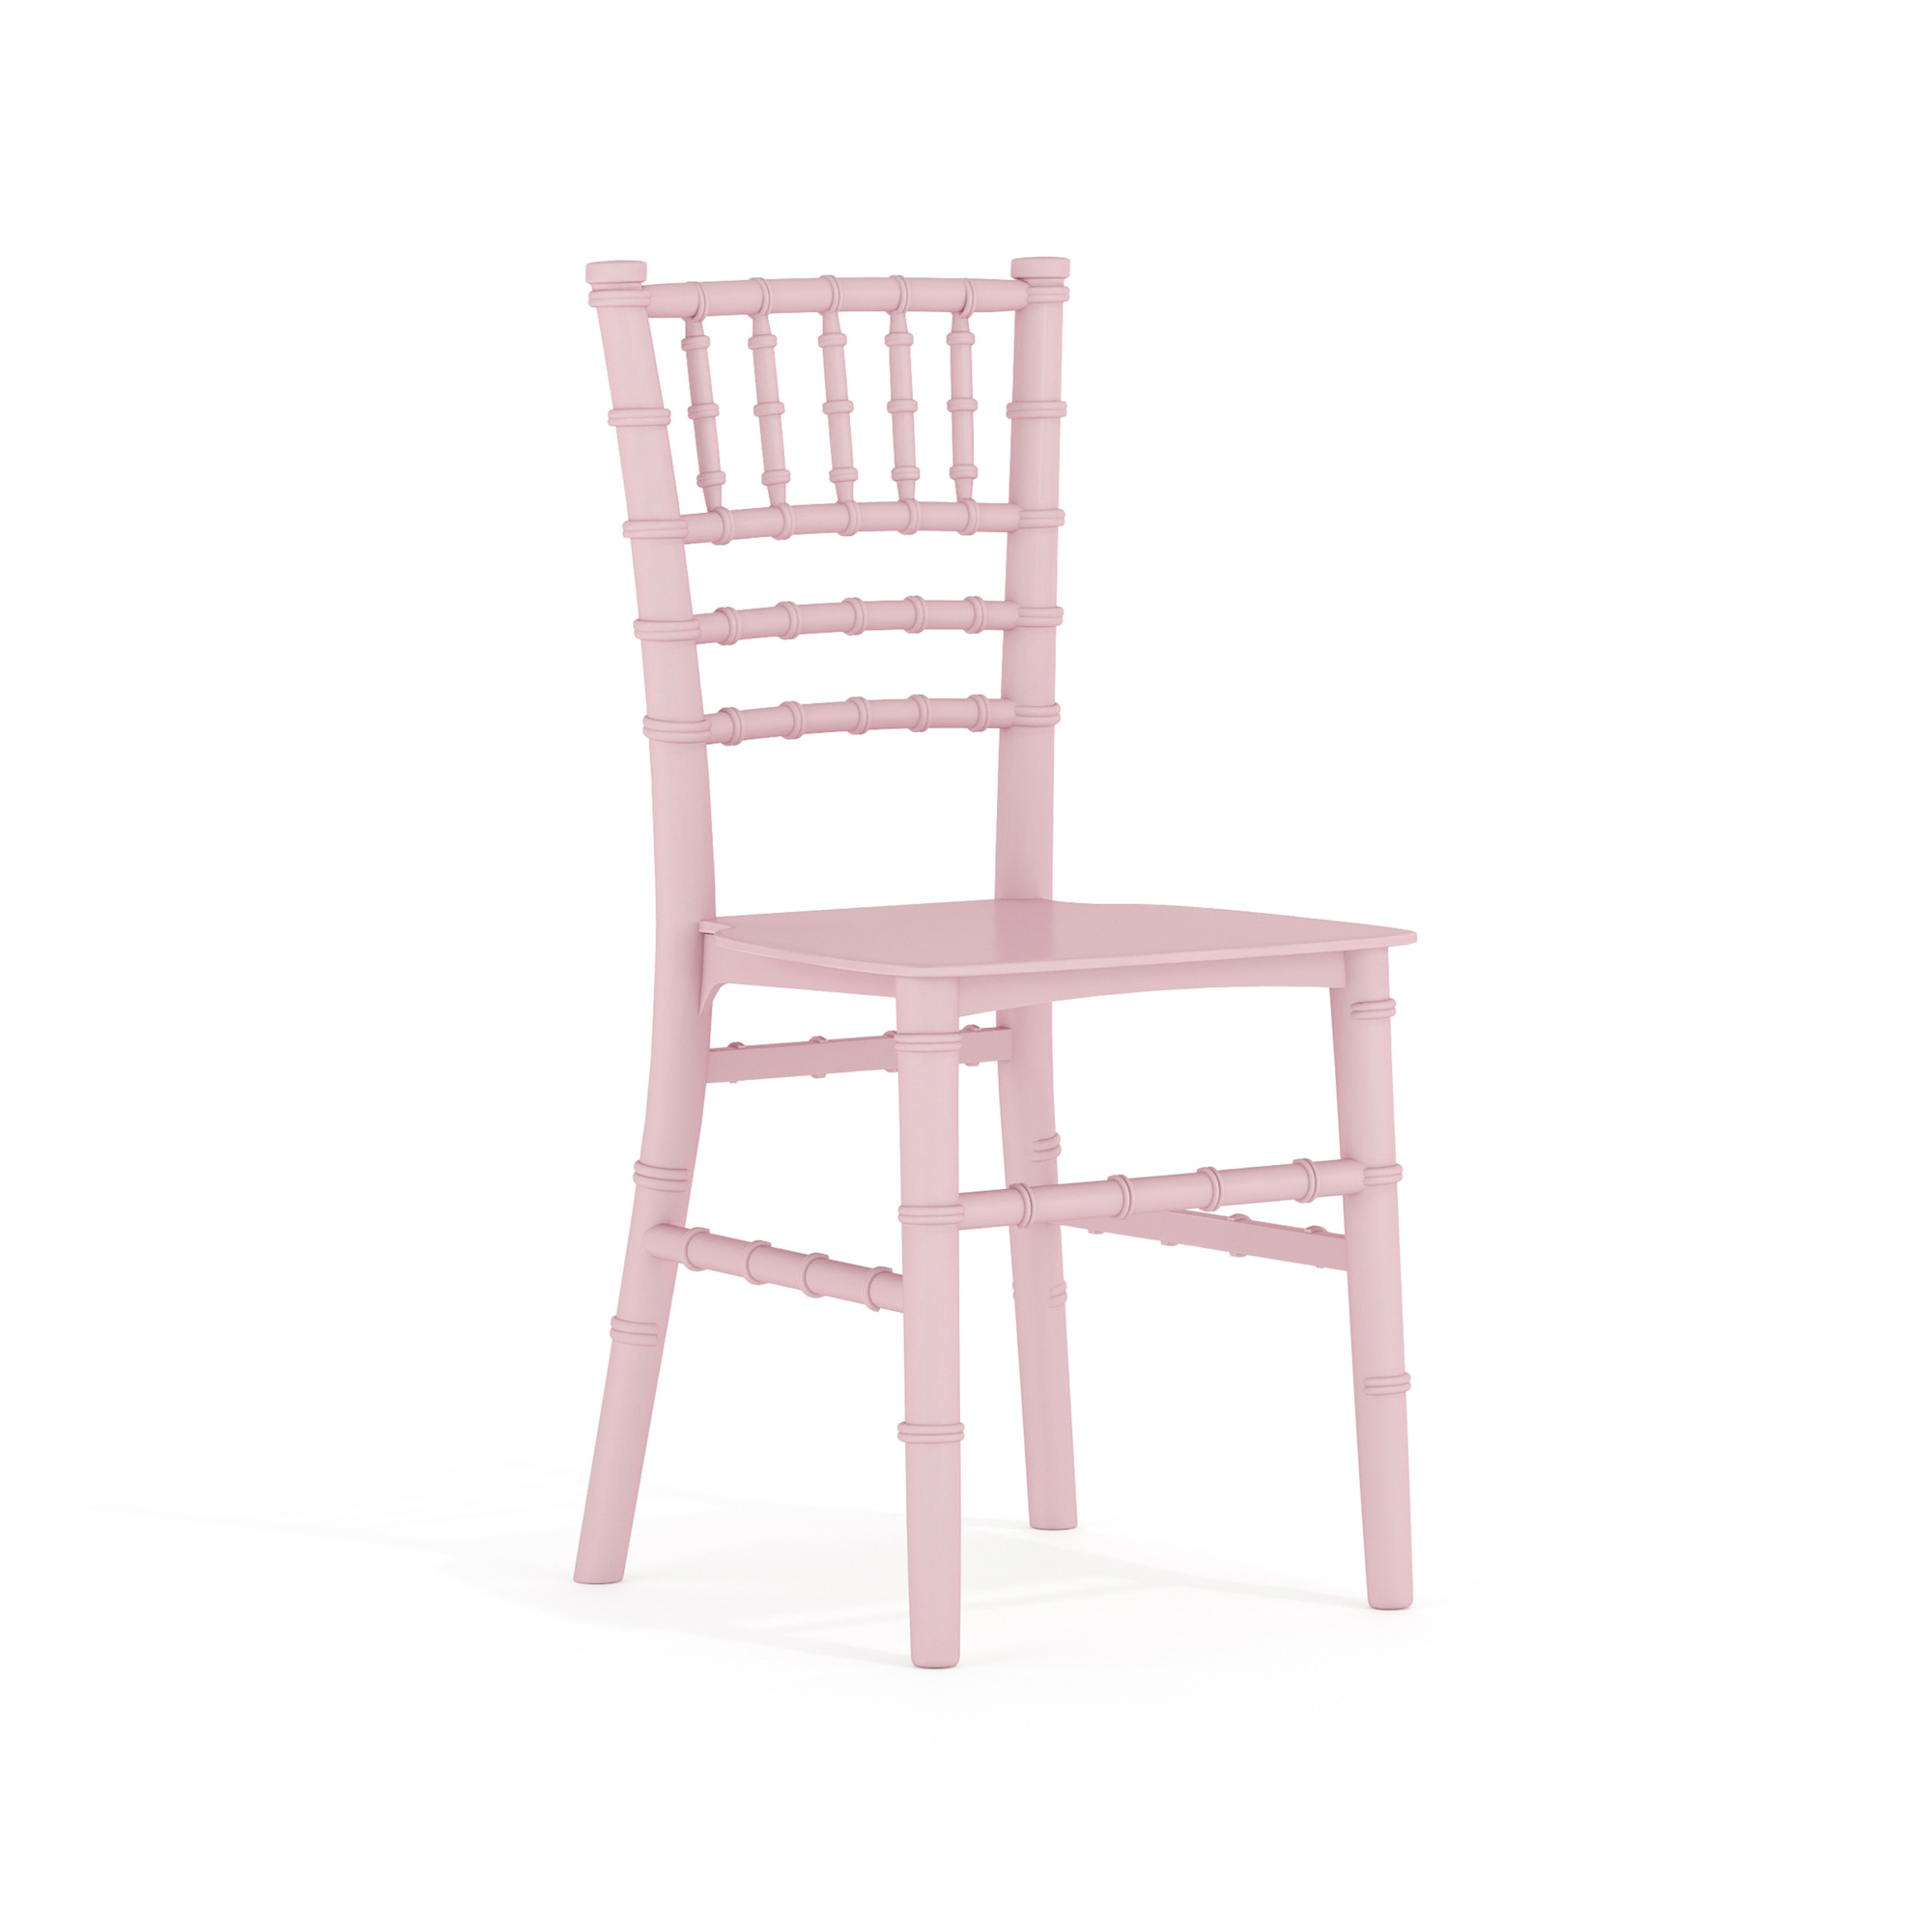 Flash Furniture, Child's Pink Resin Chiavari Chair - Event Chair, Primary Color Pink, Included (qty.) 1, Model LEL7KPK